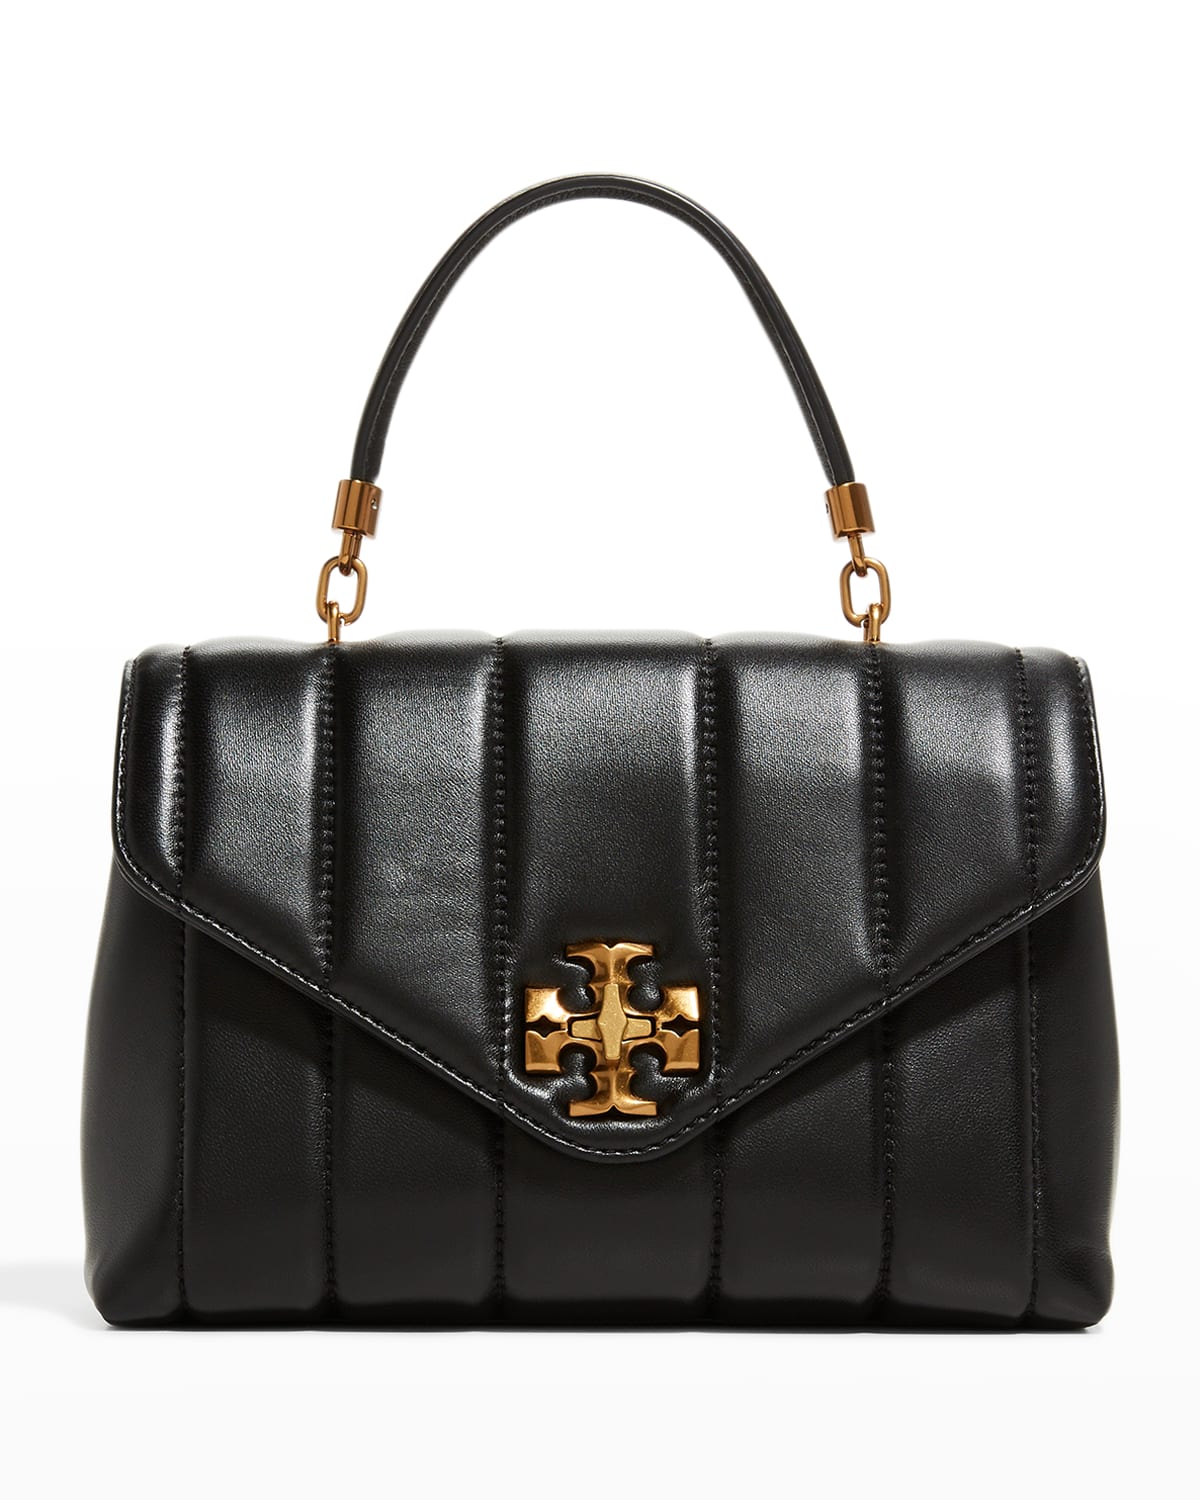 Tory Burch Kira Quilted Leather Shoulder Bag | Neiman Marcus